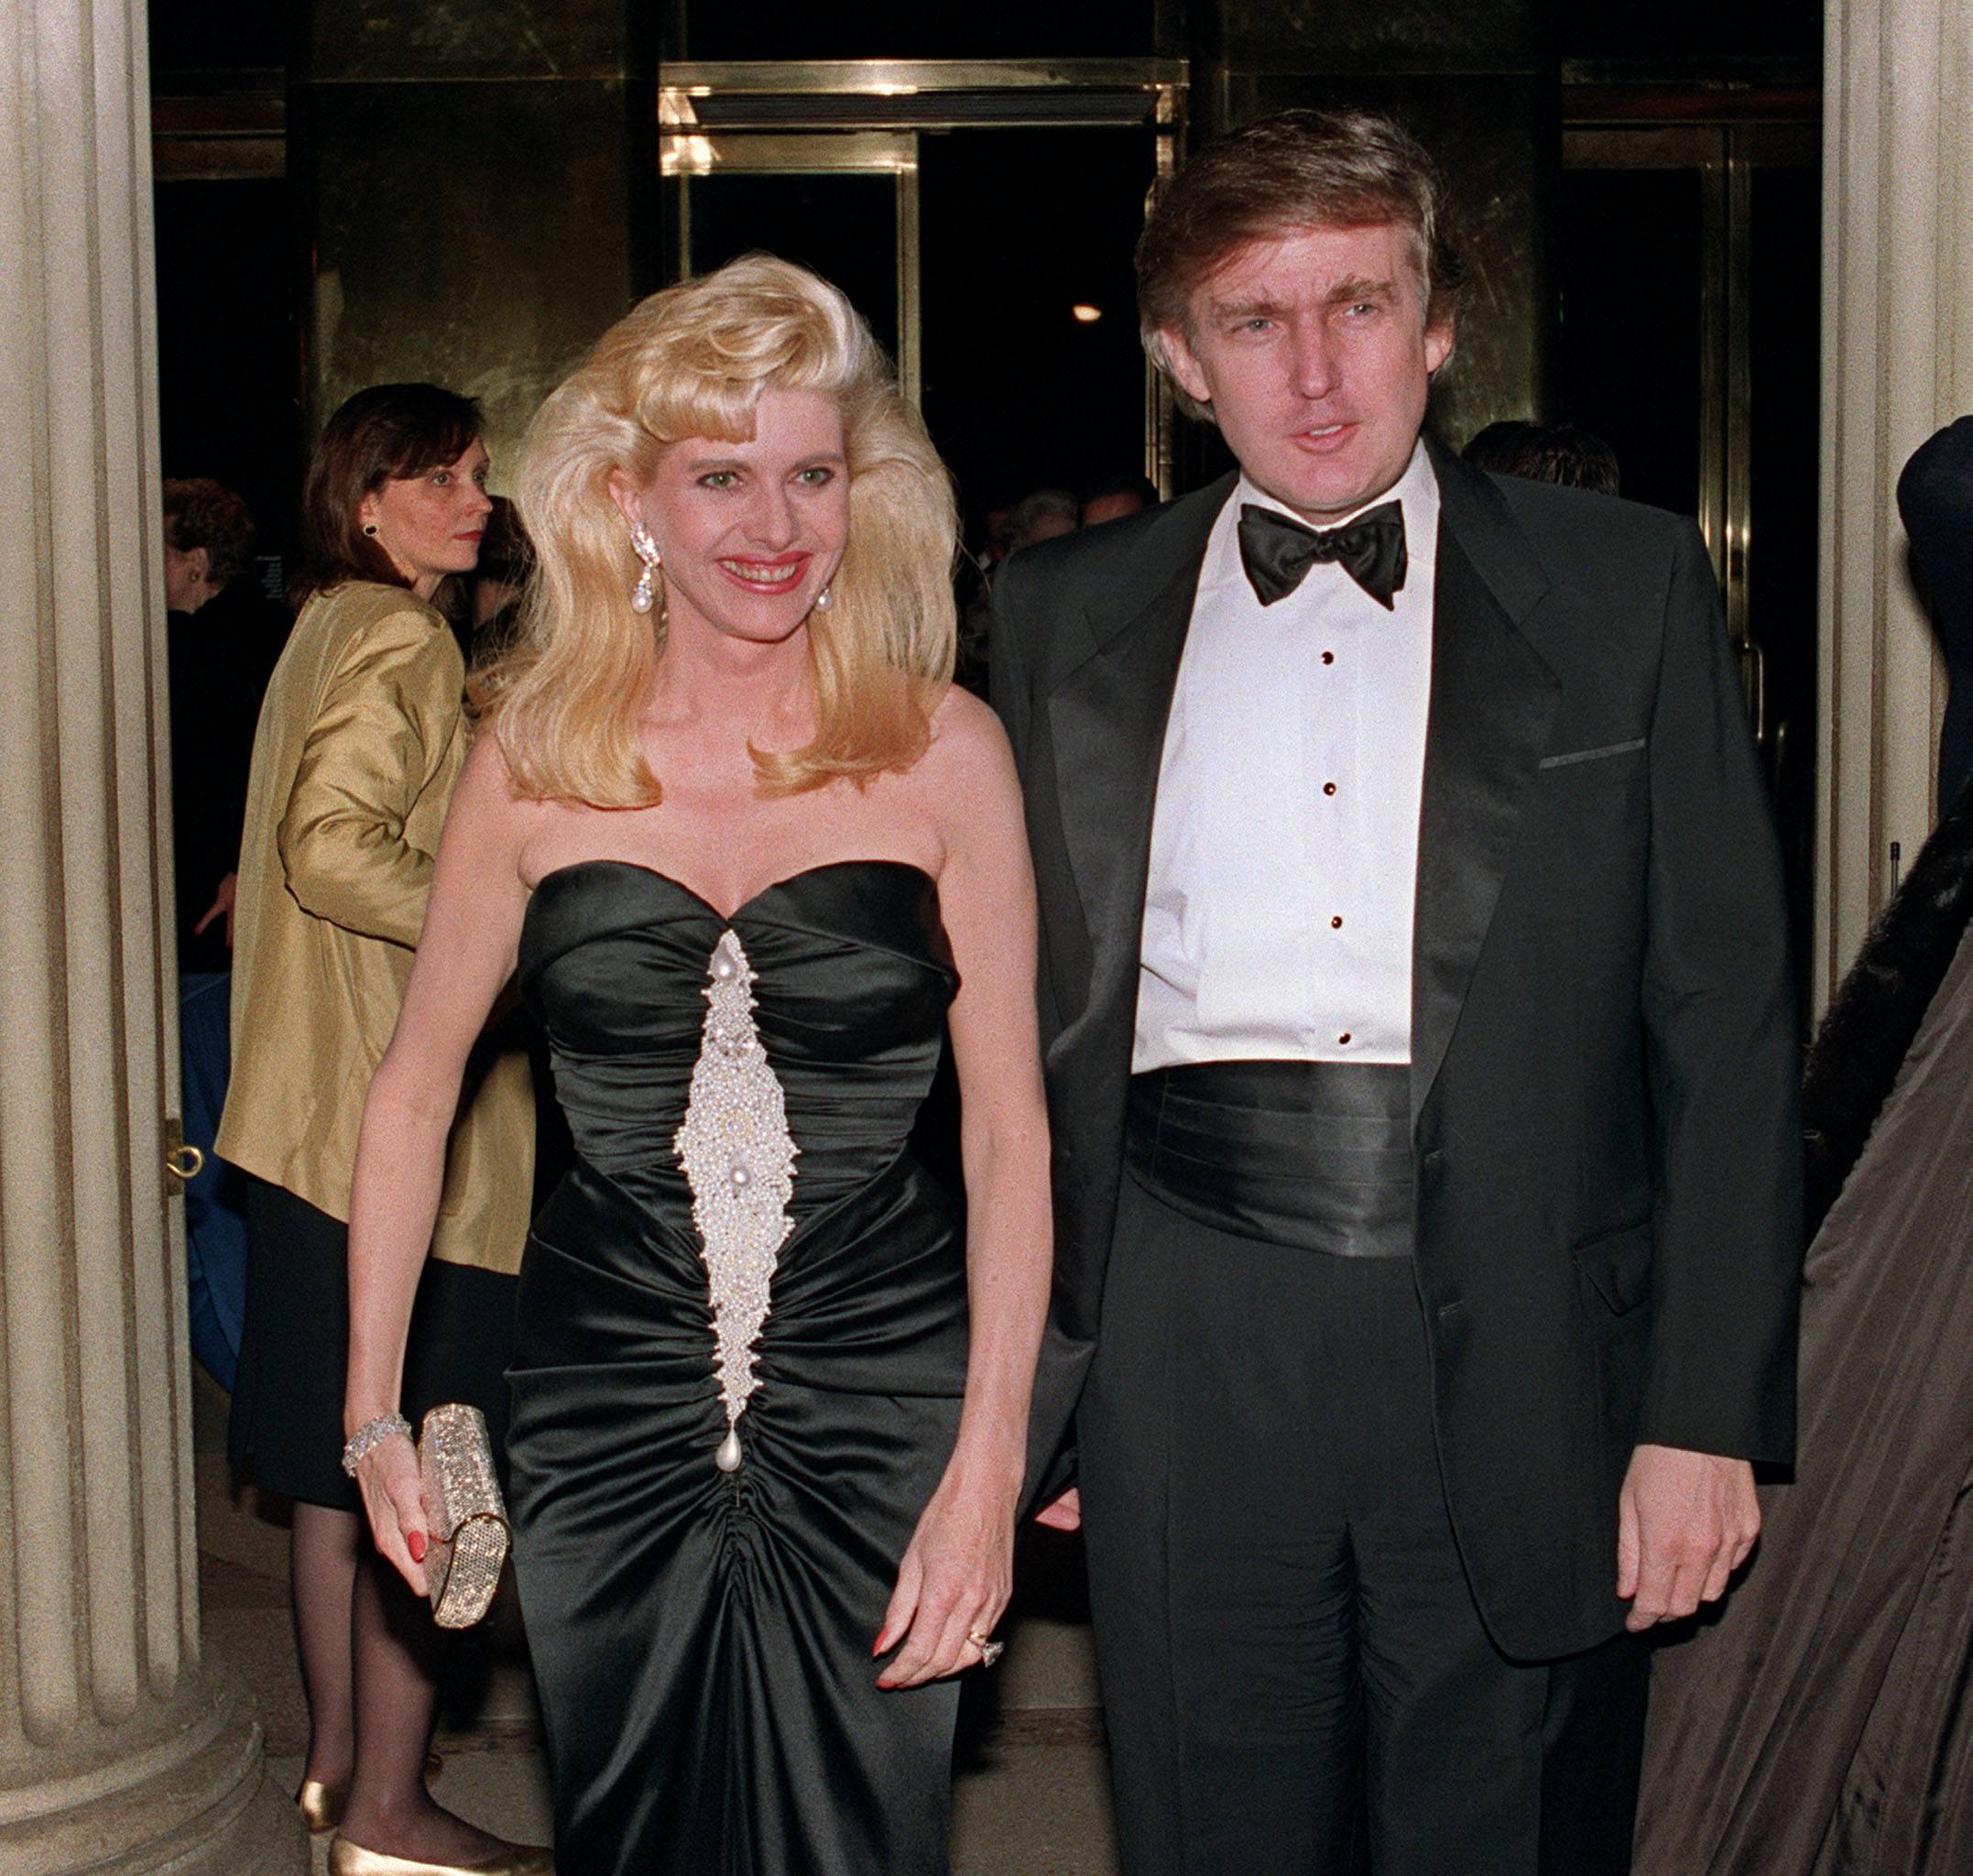 Donald and Ivana Trump standing at a formal event. 